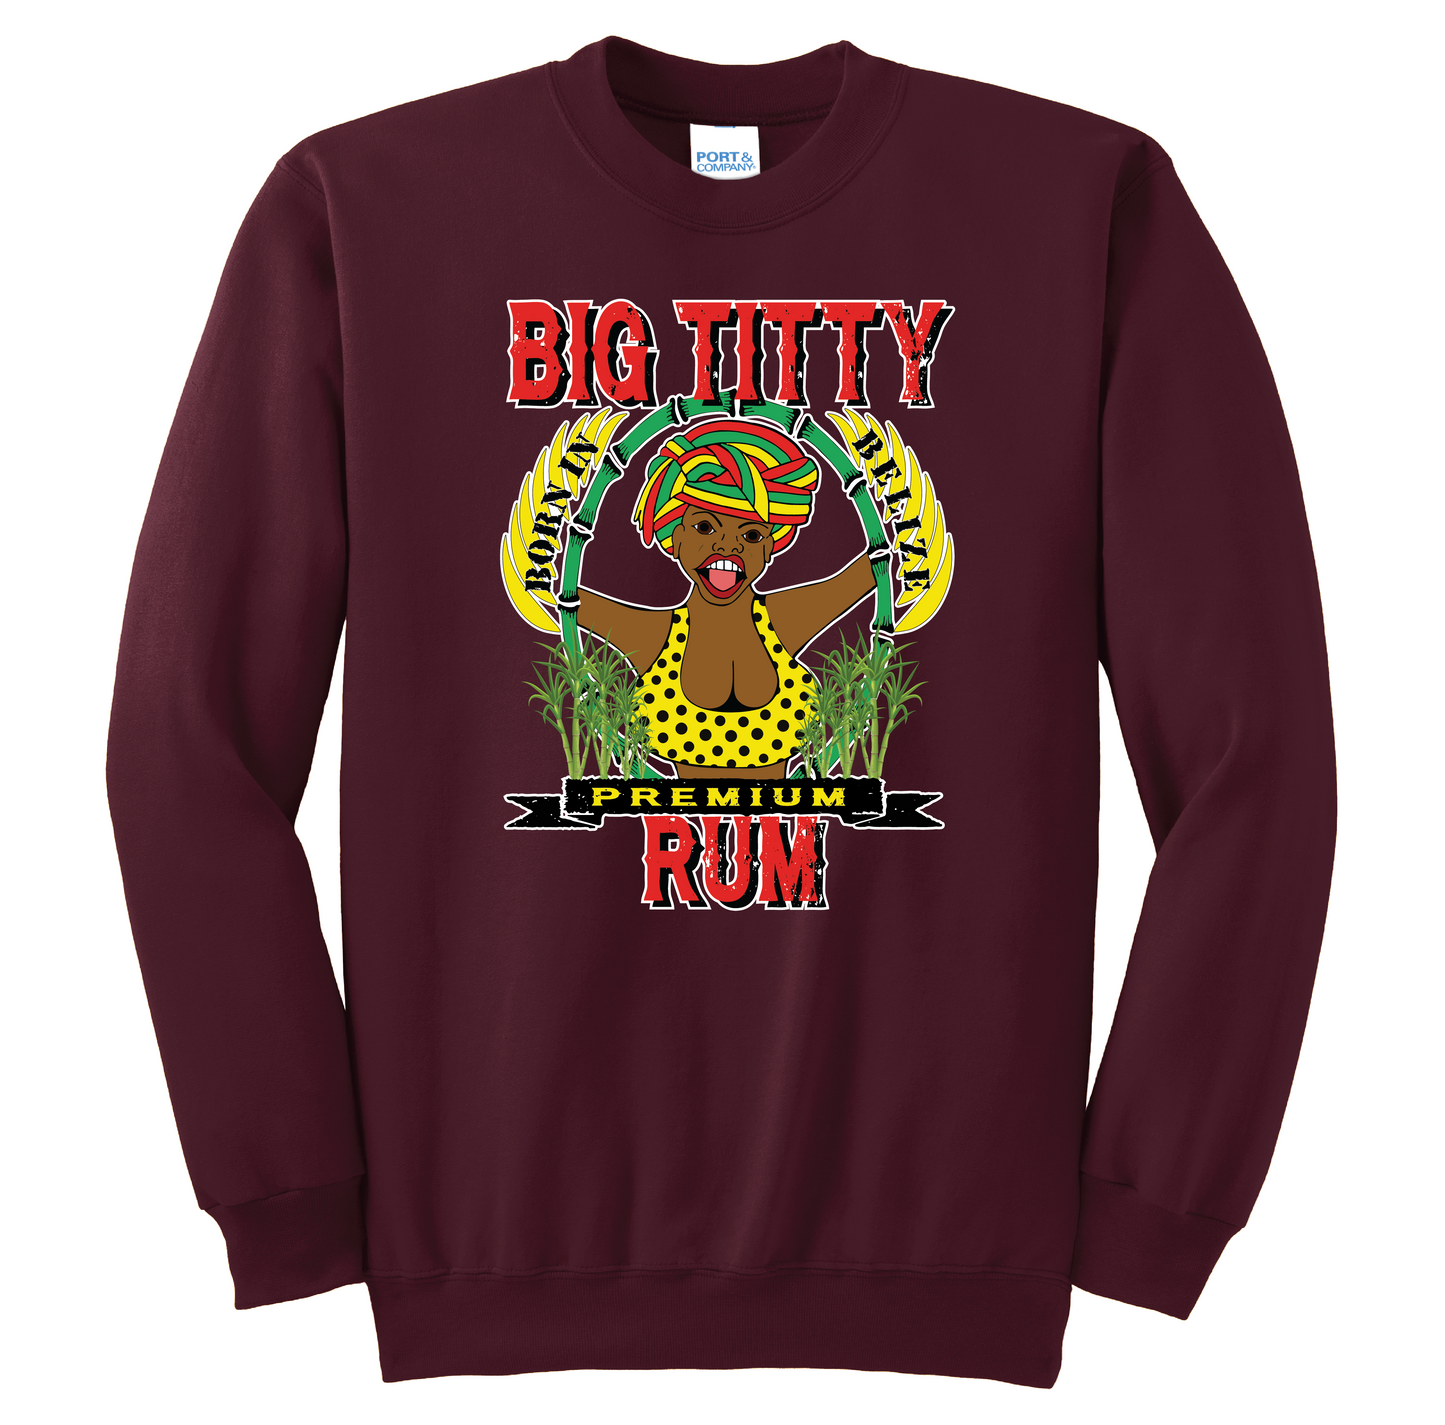 Big Titty Rum Crewneck - Logo on front with blank back